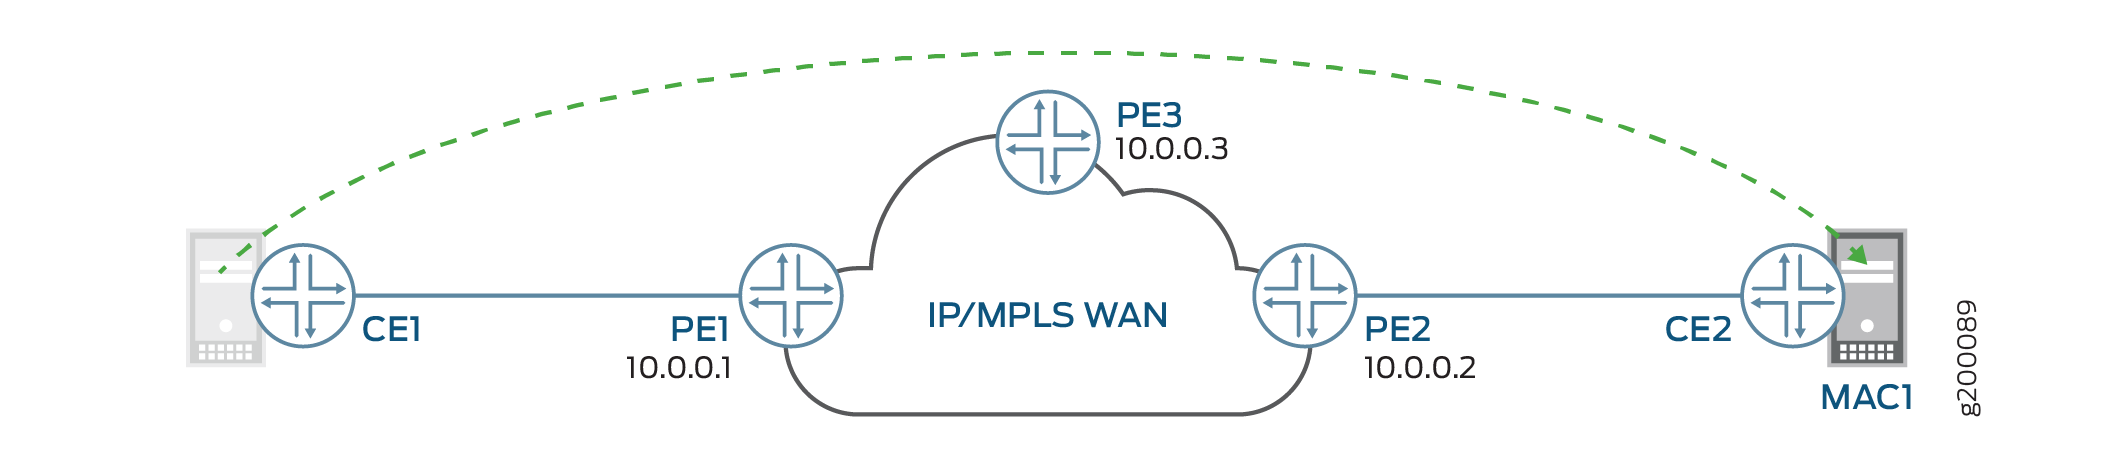 MAC Mobility in an EVPN Network